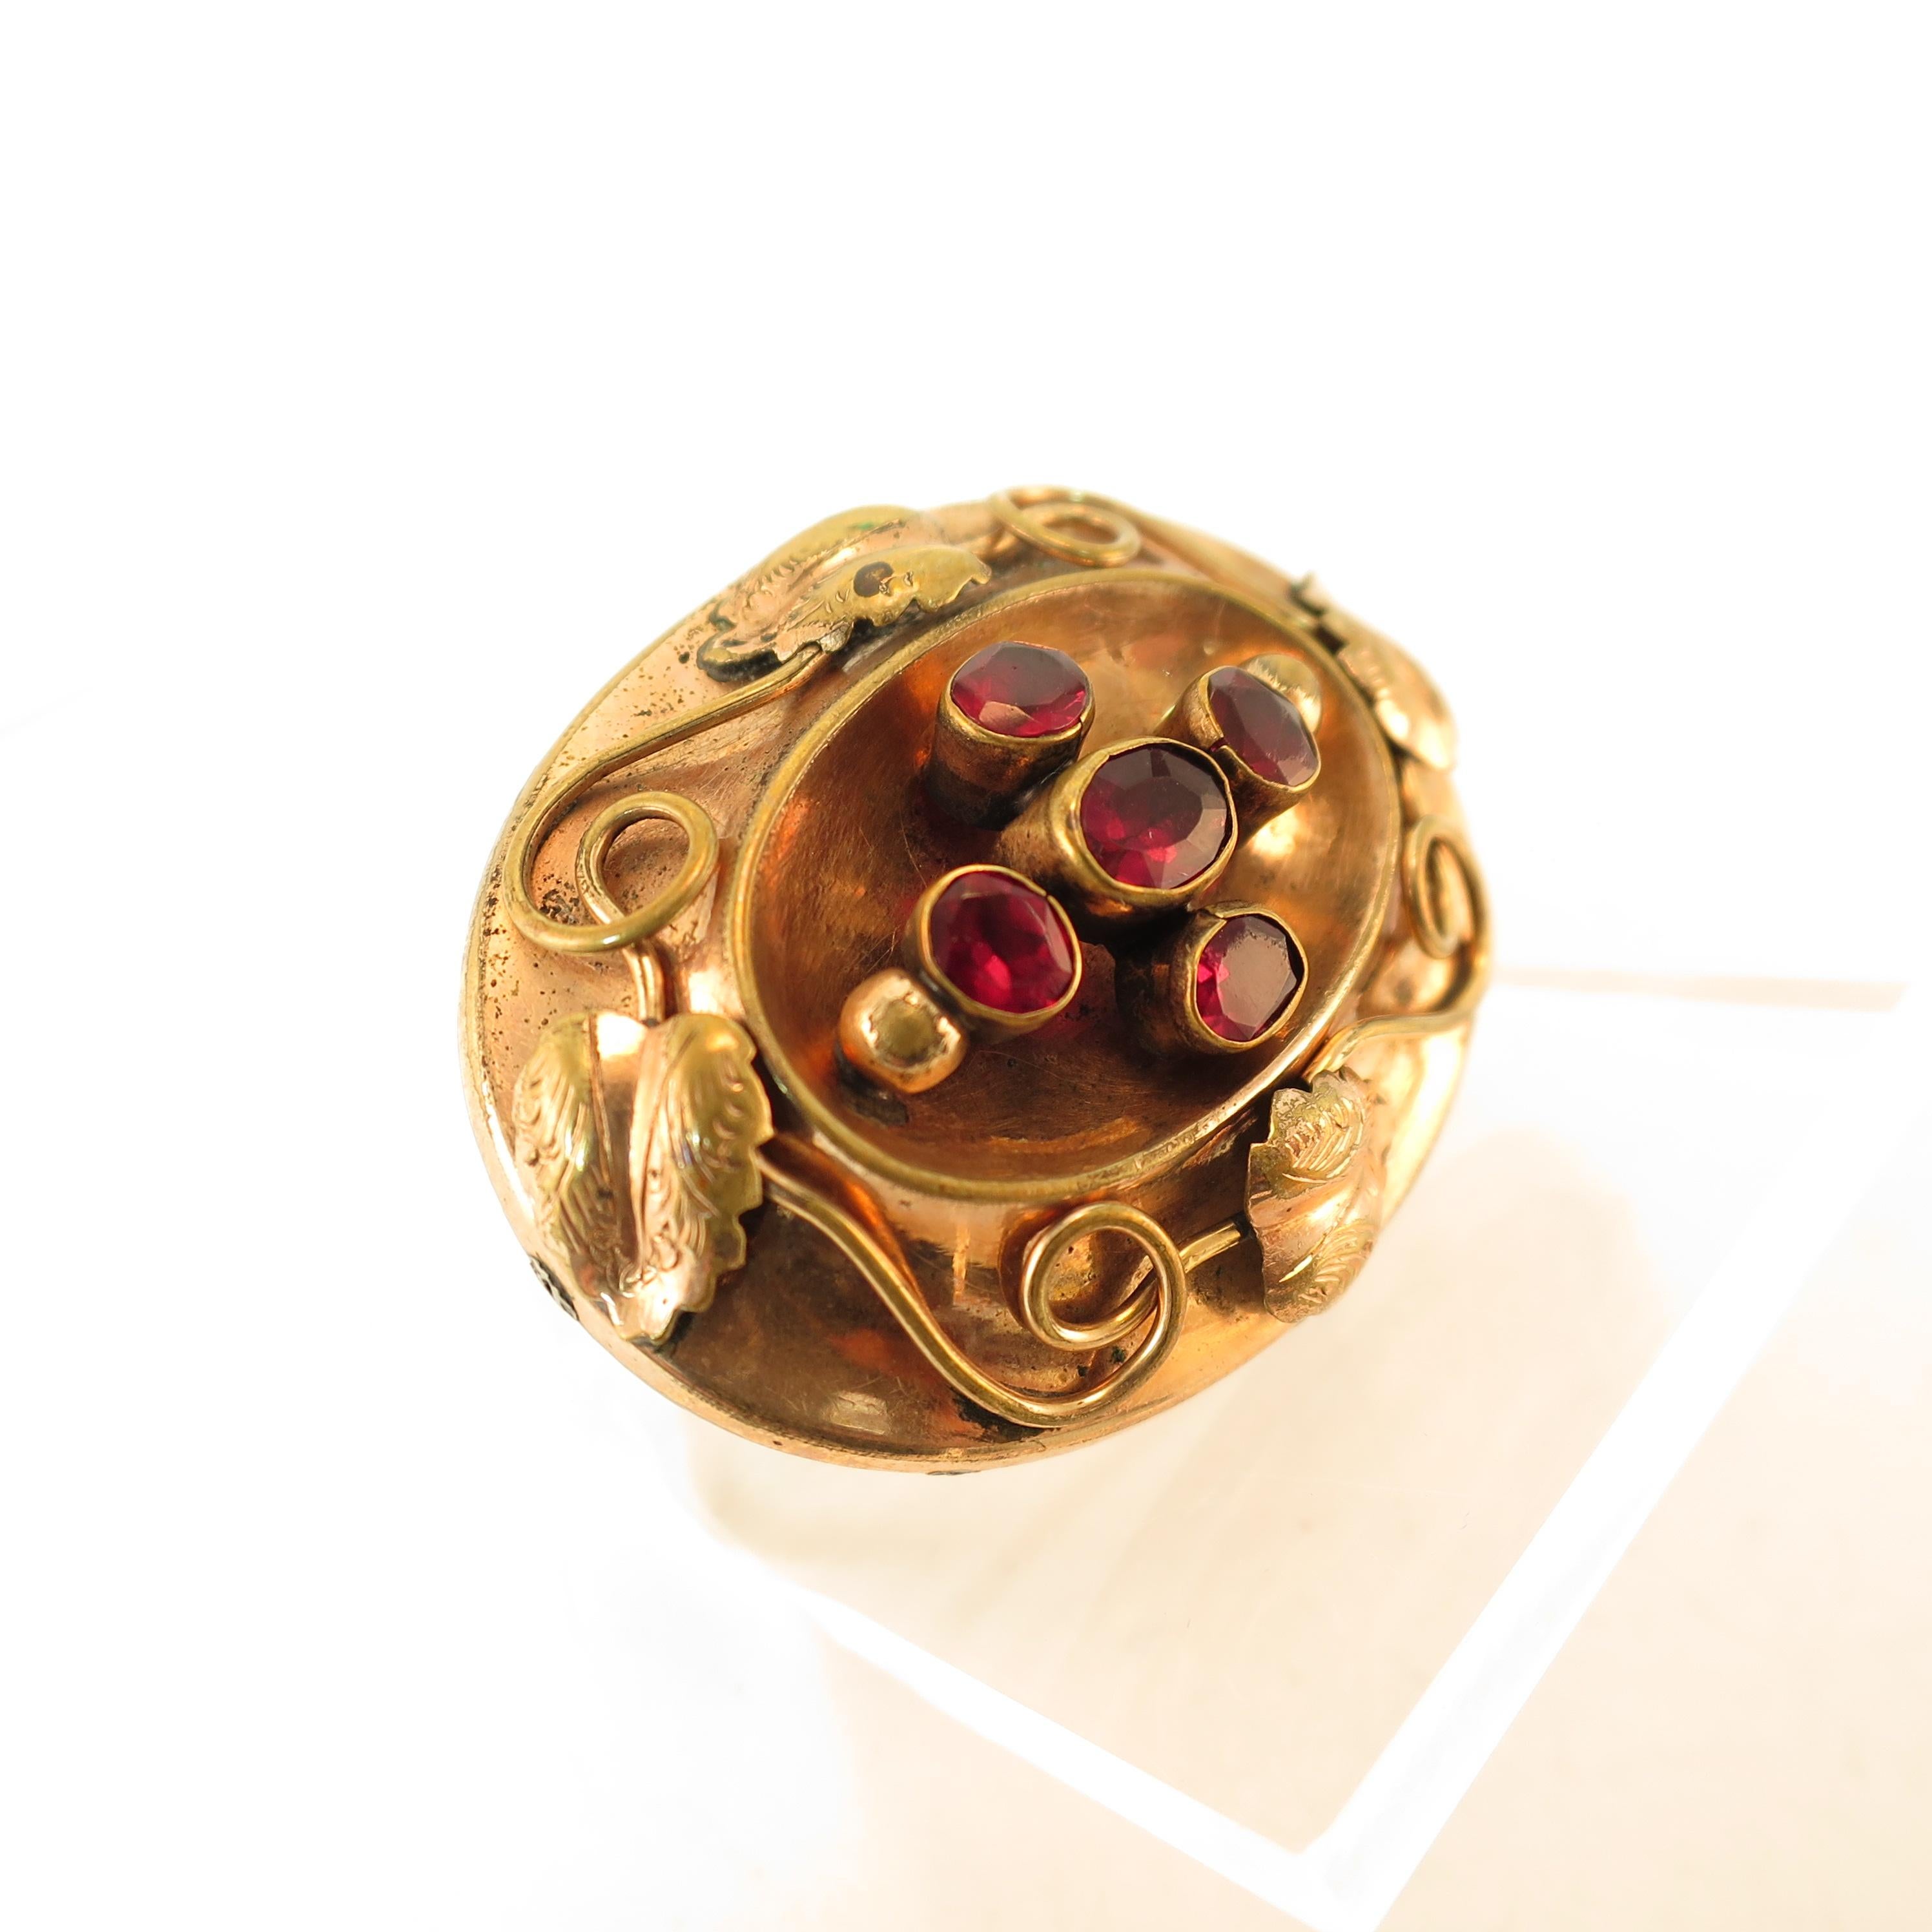 Offered here is a Victorian 10k gold hollow-ware brooch with garnets from the 1860s. The oval curved hollow-ware platform is centered with a shadowbox design within which are five faceted garnets in tall collet settings -- a slightly larger center